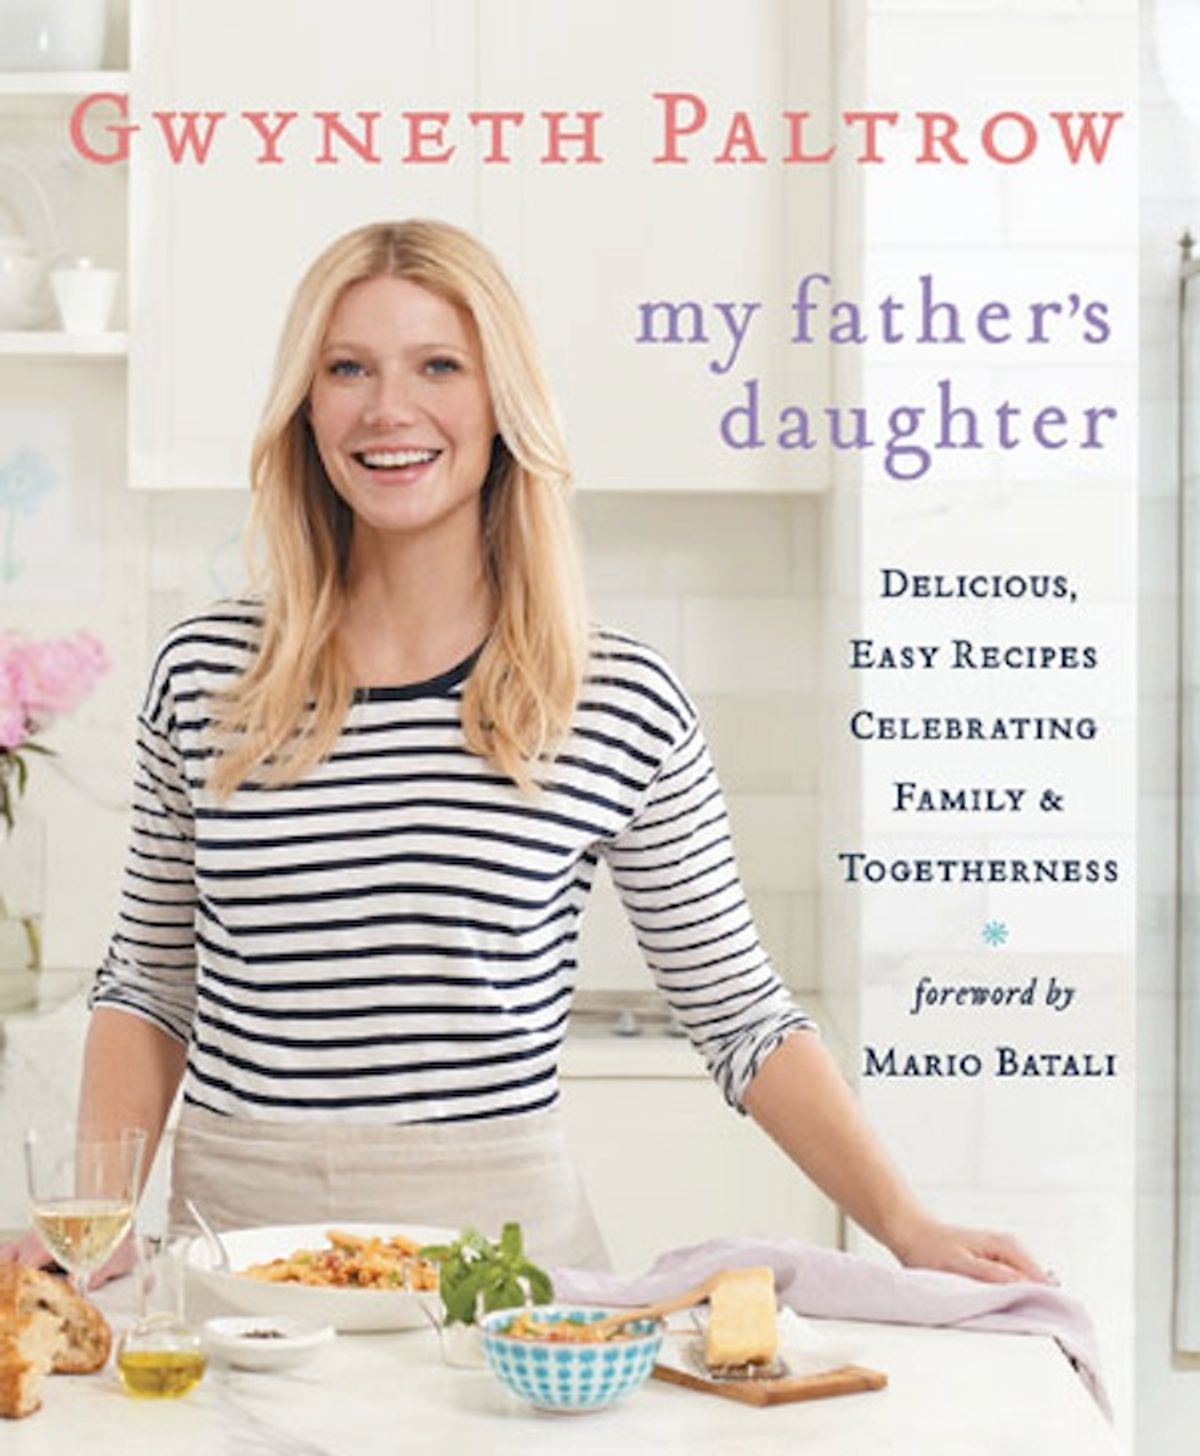 Gwyneth's cookbook: surprisingly non-GOOPy.